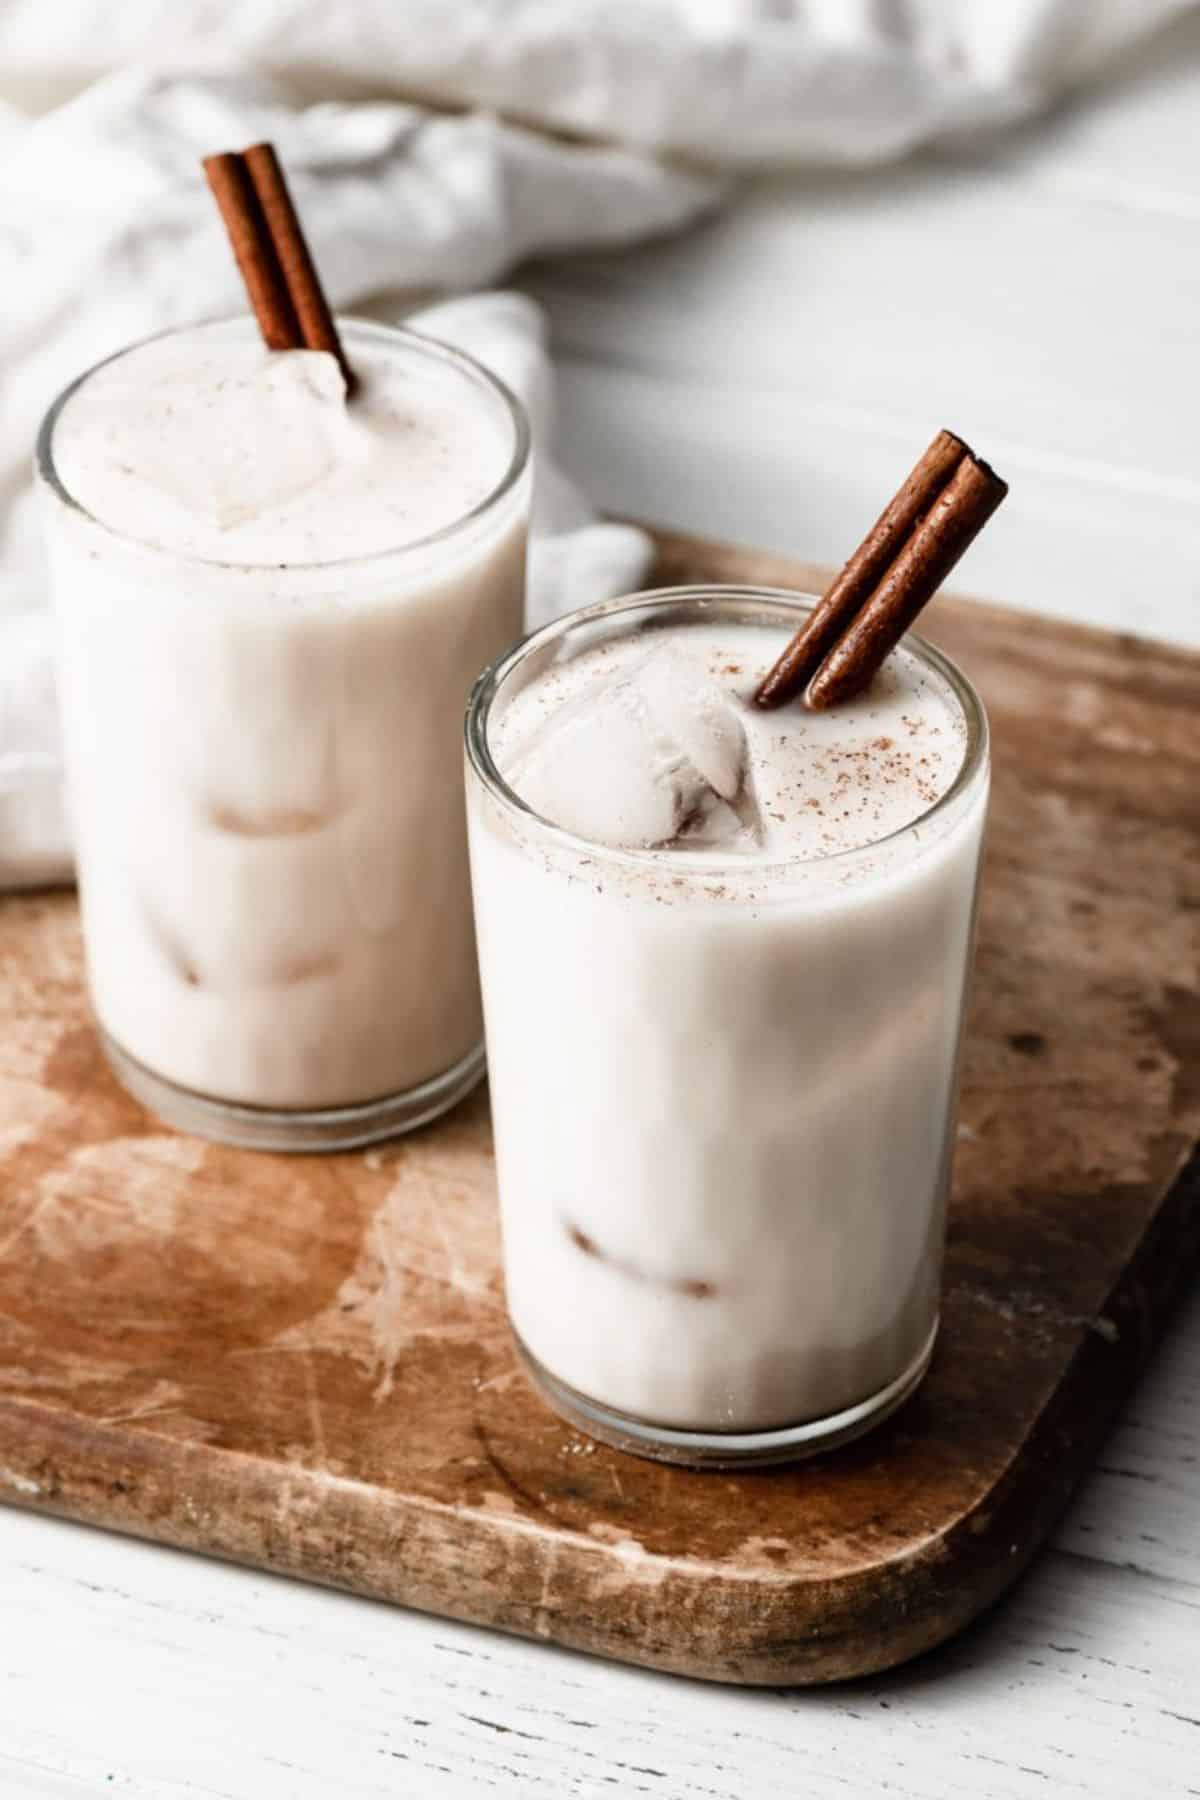 Horchata mexican dessert in two glass cups with cinnamon sticks on a wooden board.